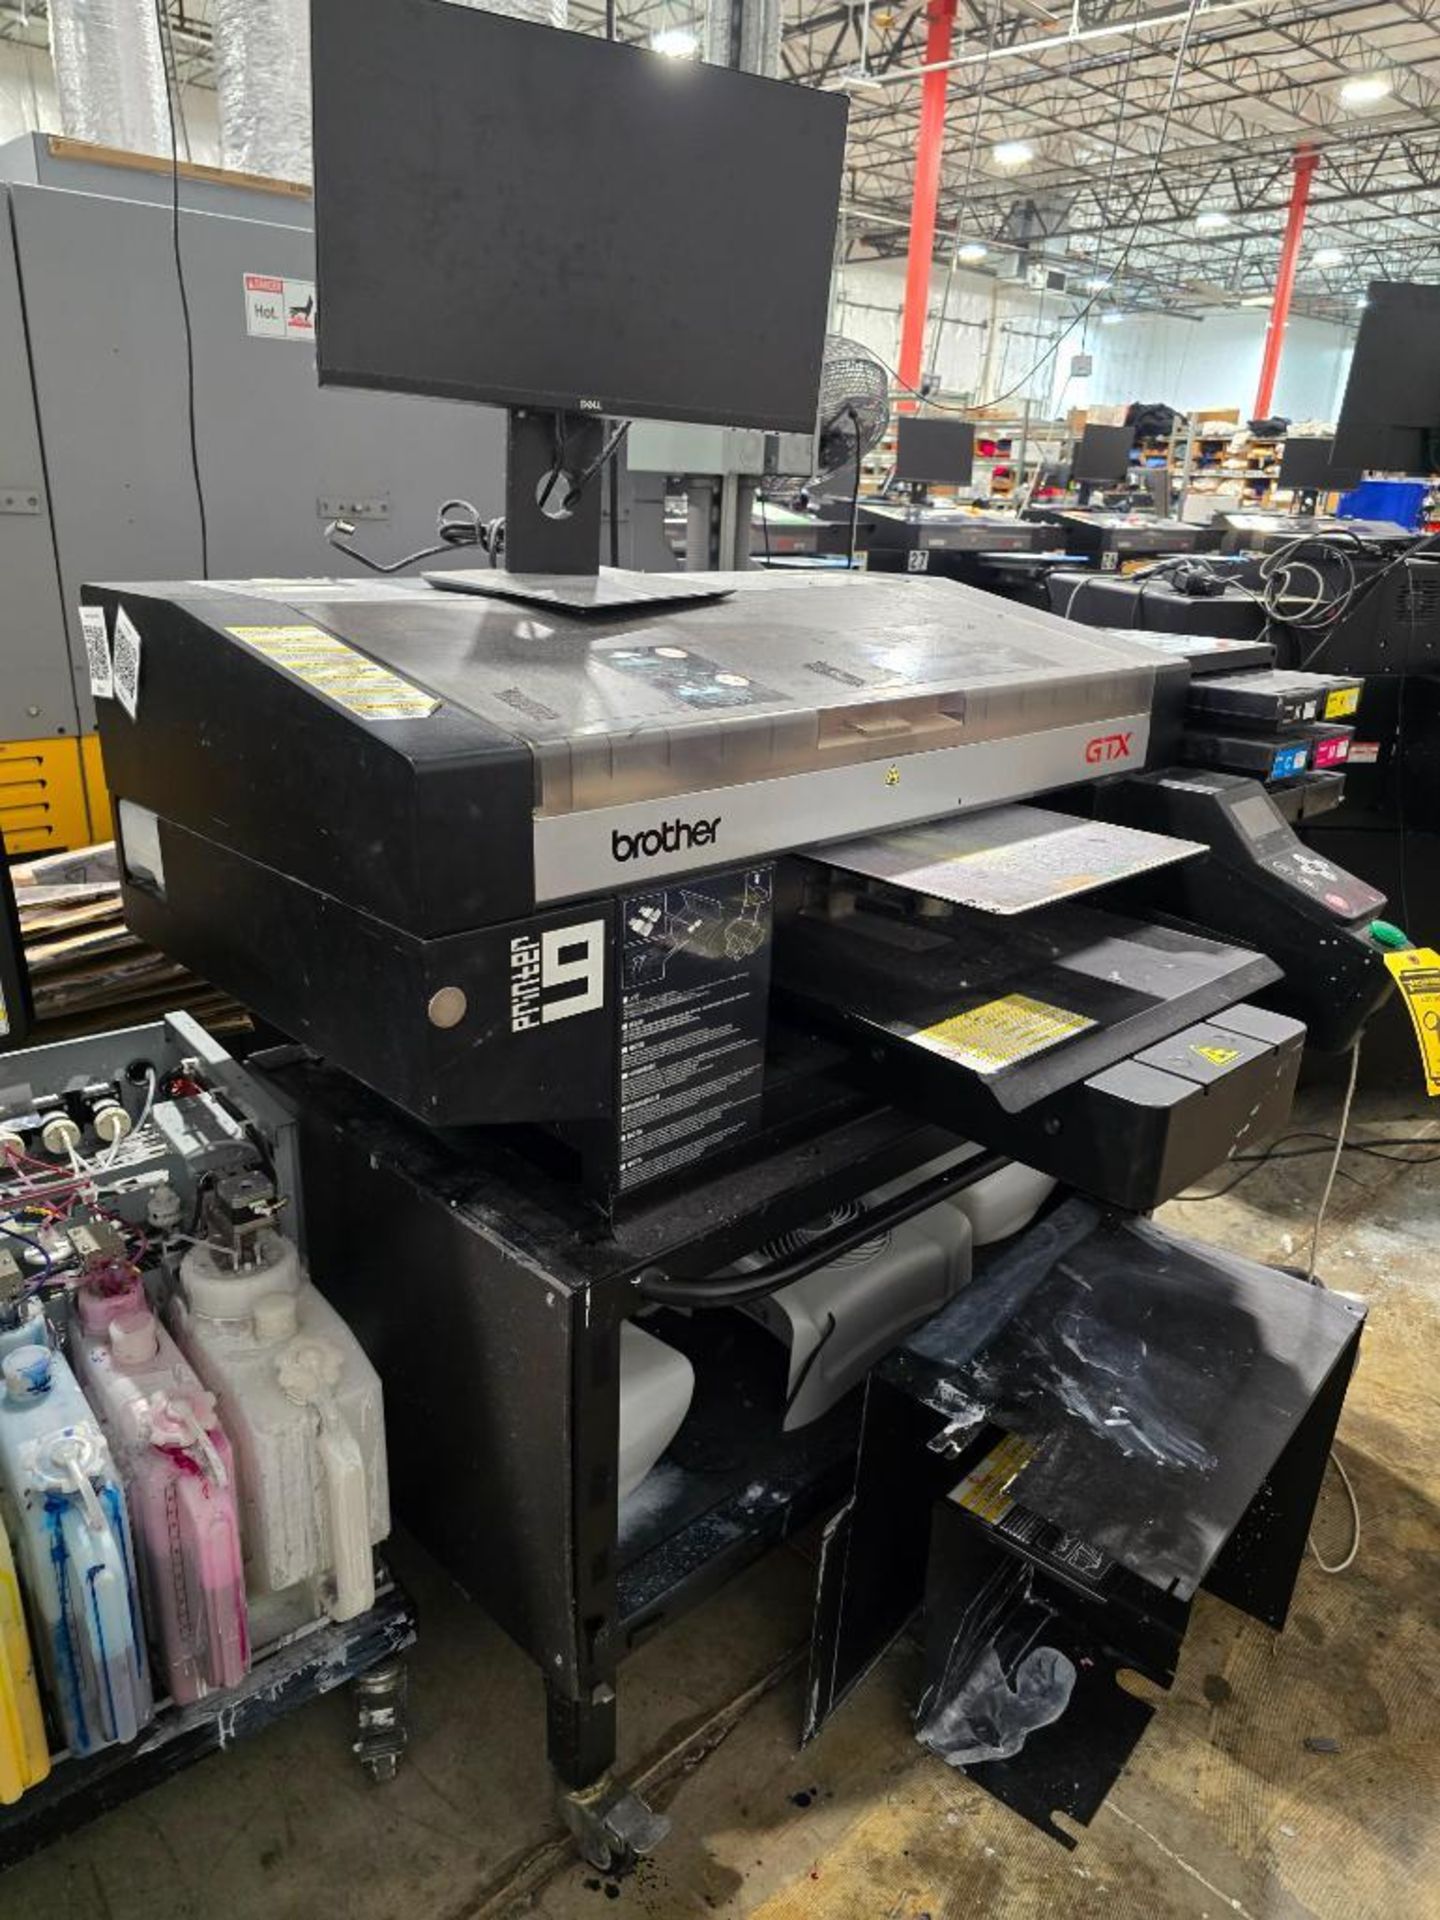 2018 Brother GTX-422 DTG (Direct to Garment) Printer, Twin Head, 6-Color, Textile & Water Based Pigm - Image 2 of 7